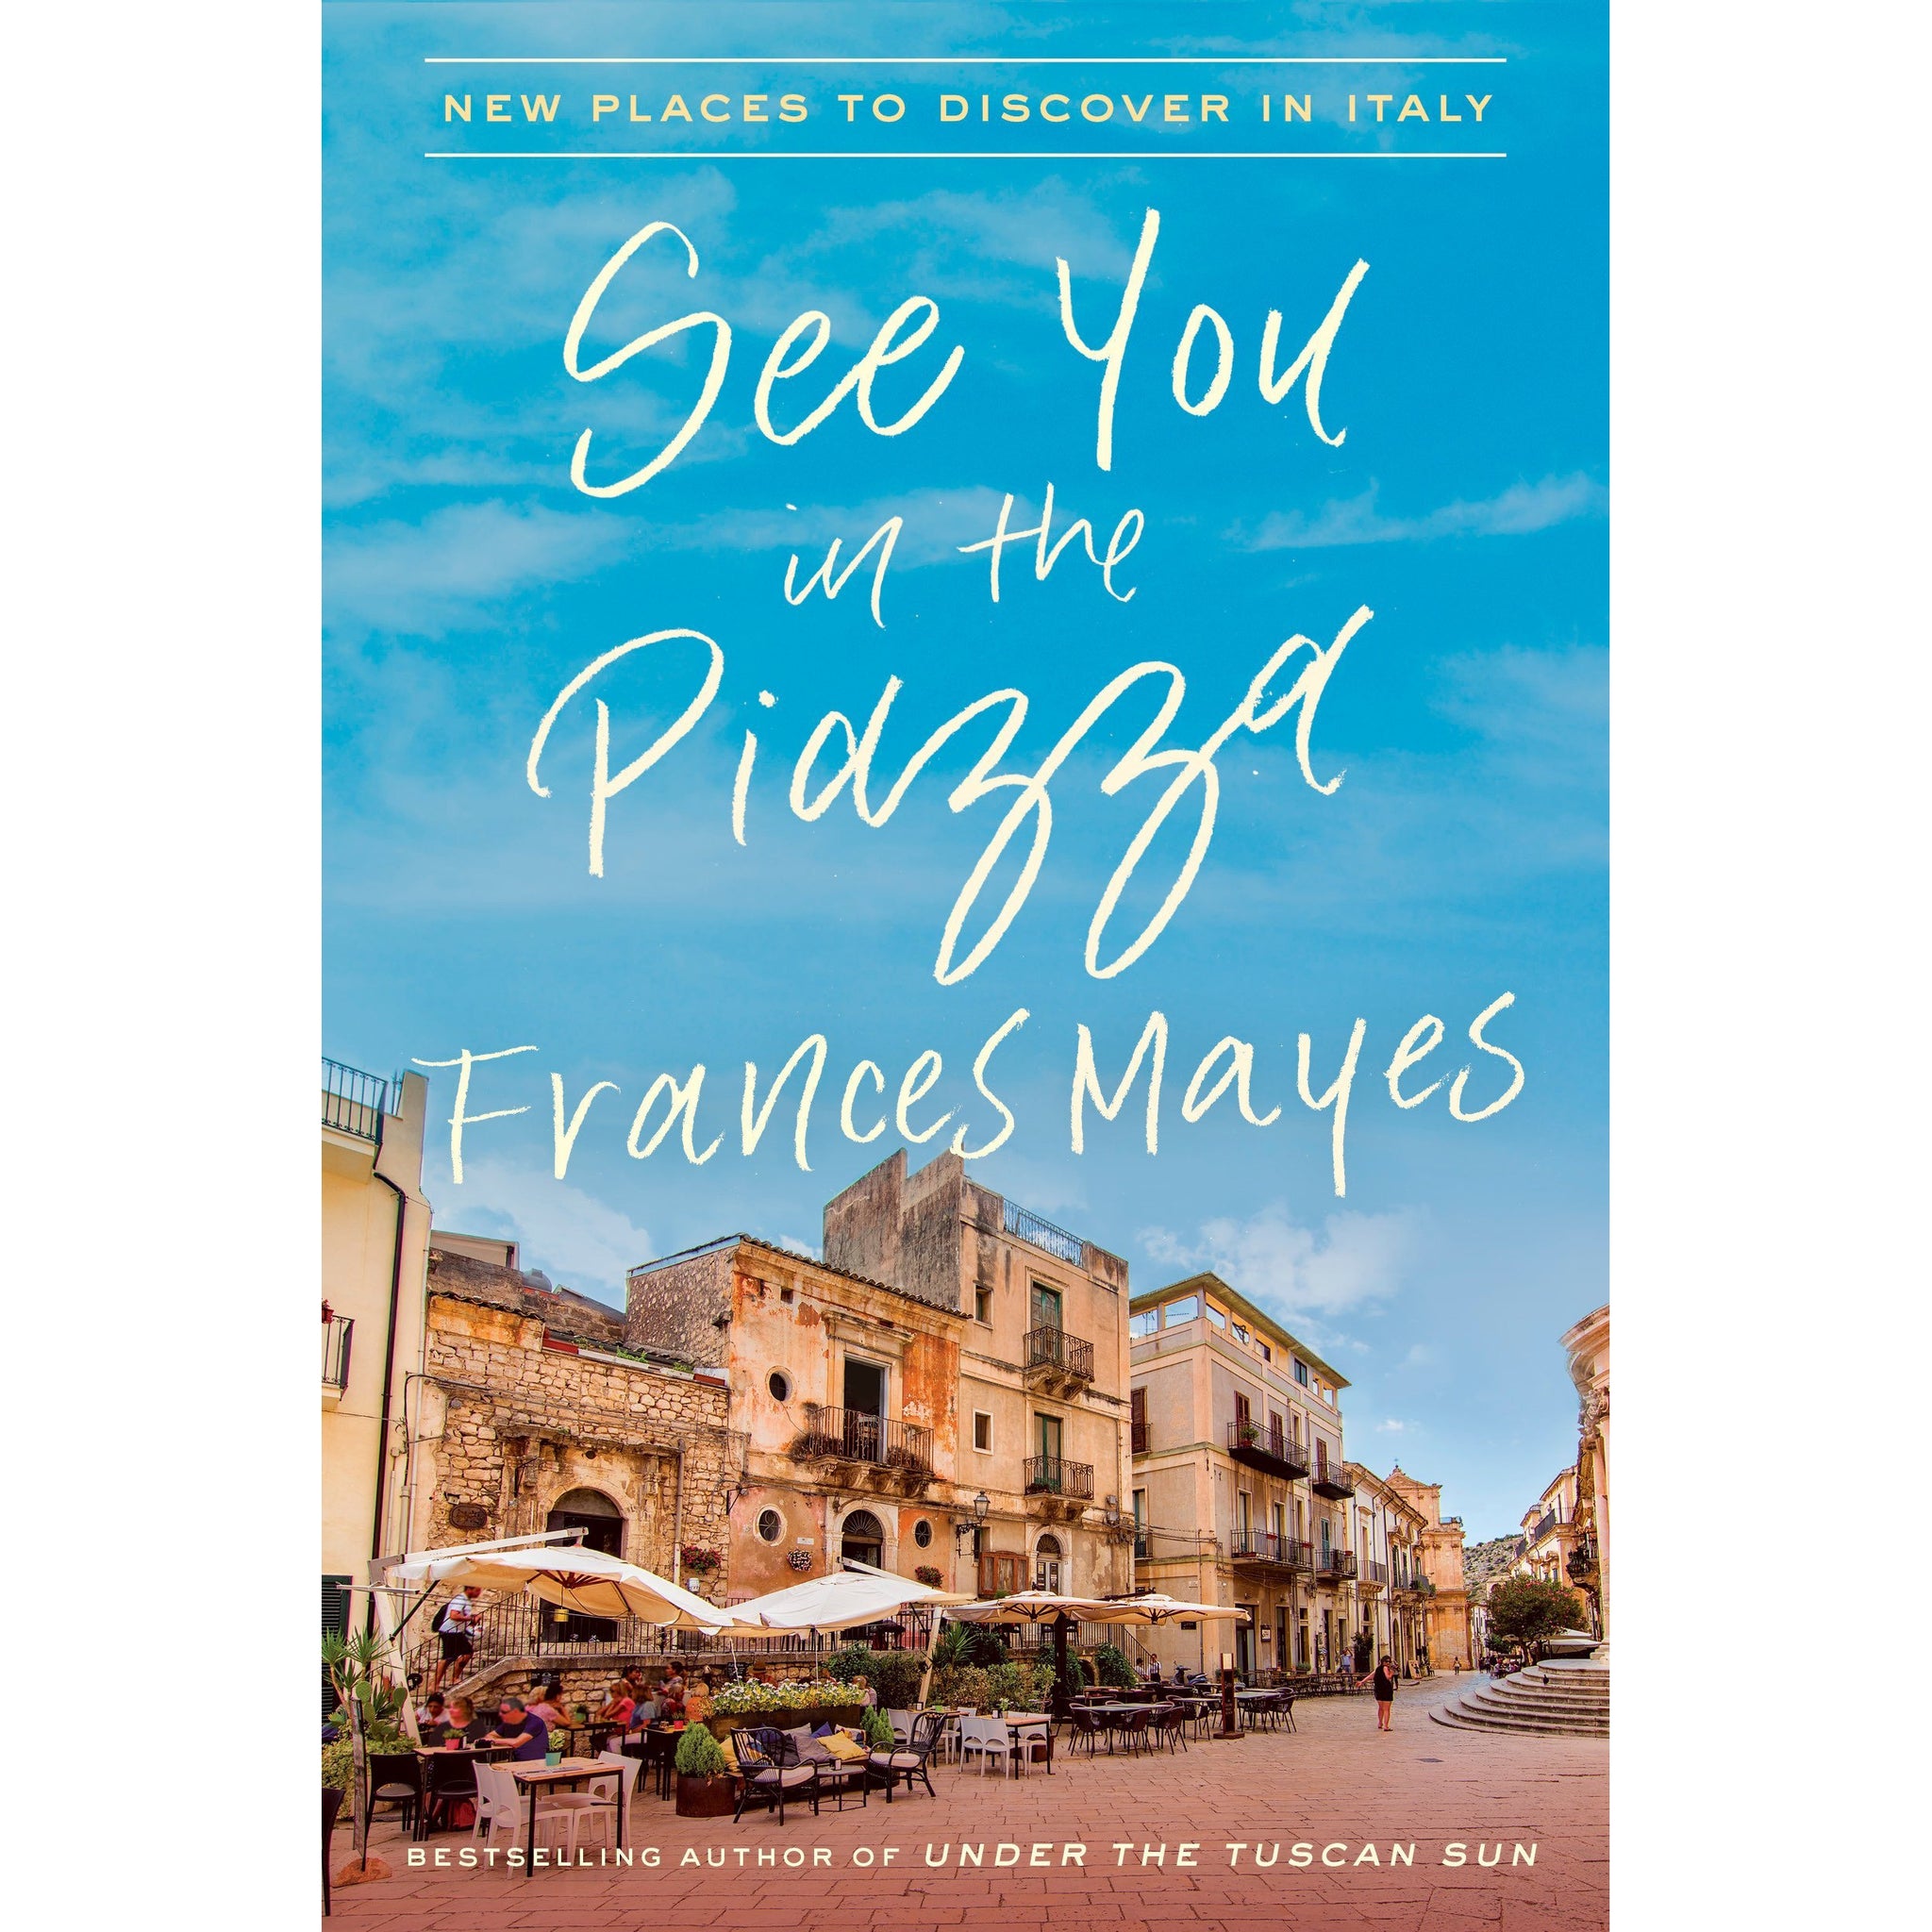 Frances Mayes: See You in the Piazza